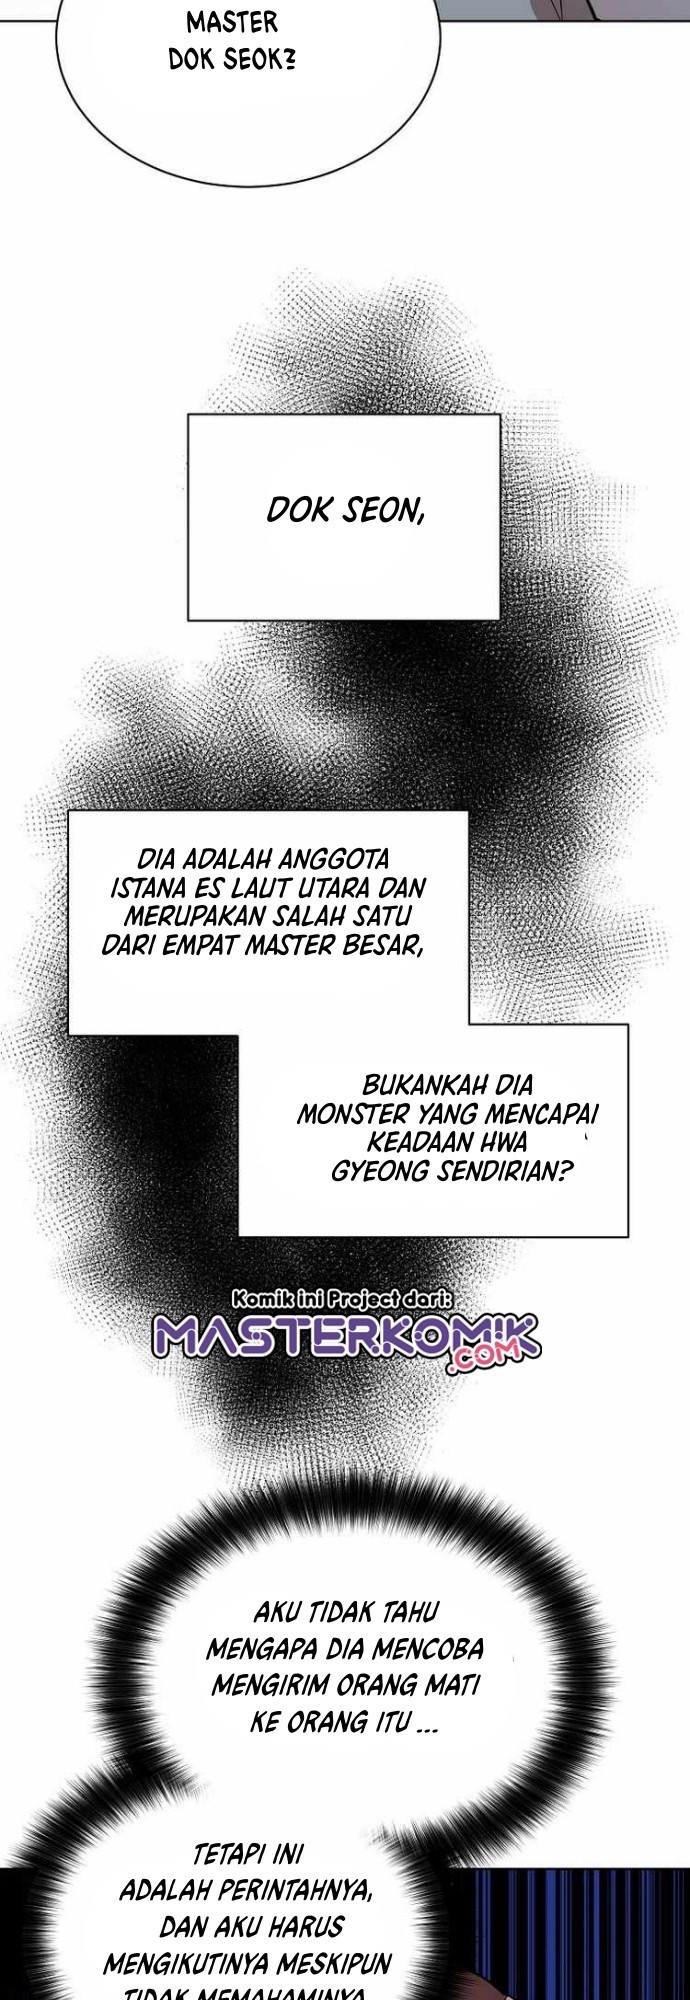 Fire King Dragon Chapter 52